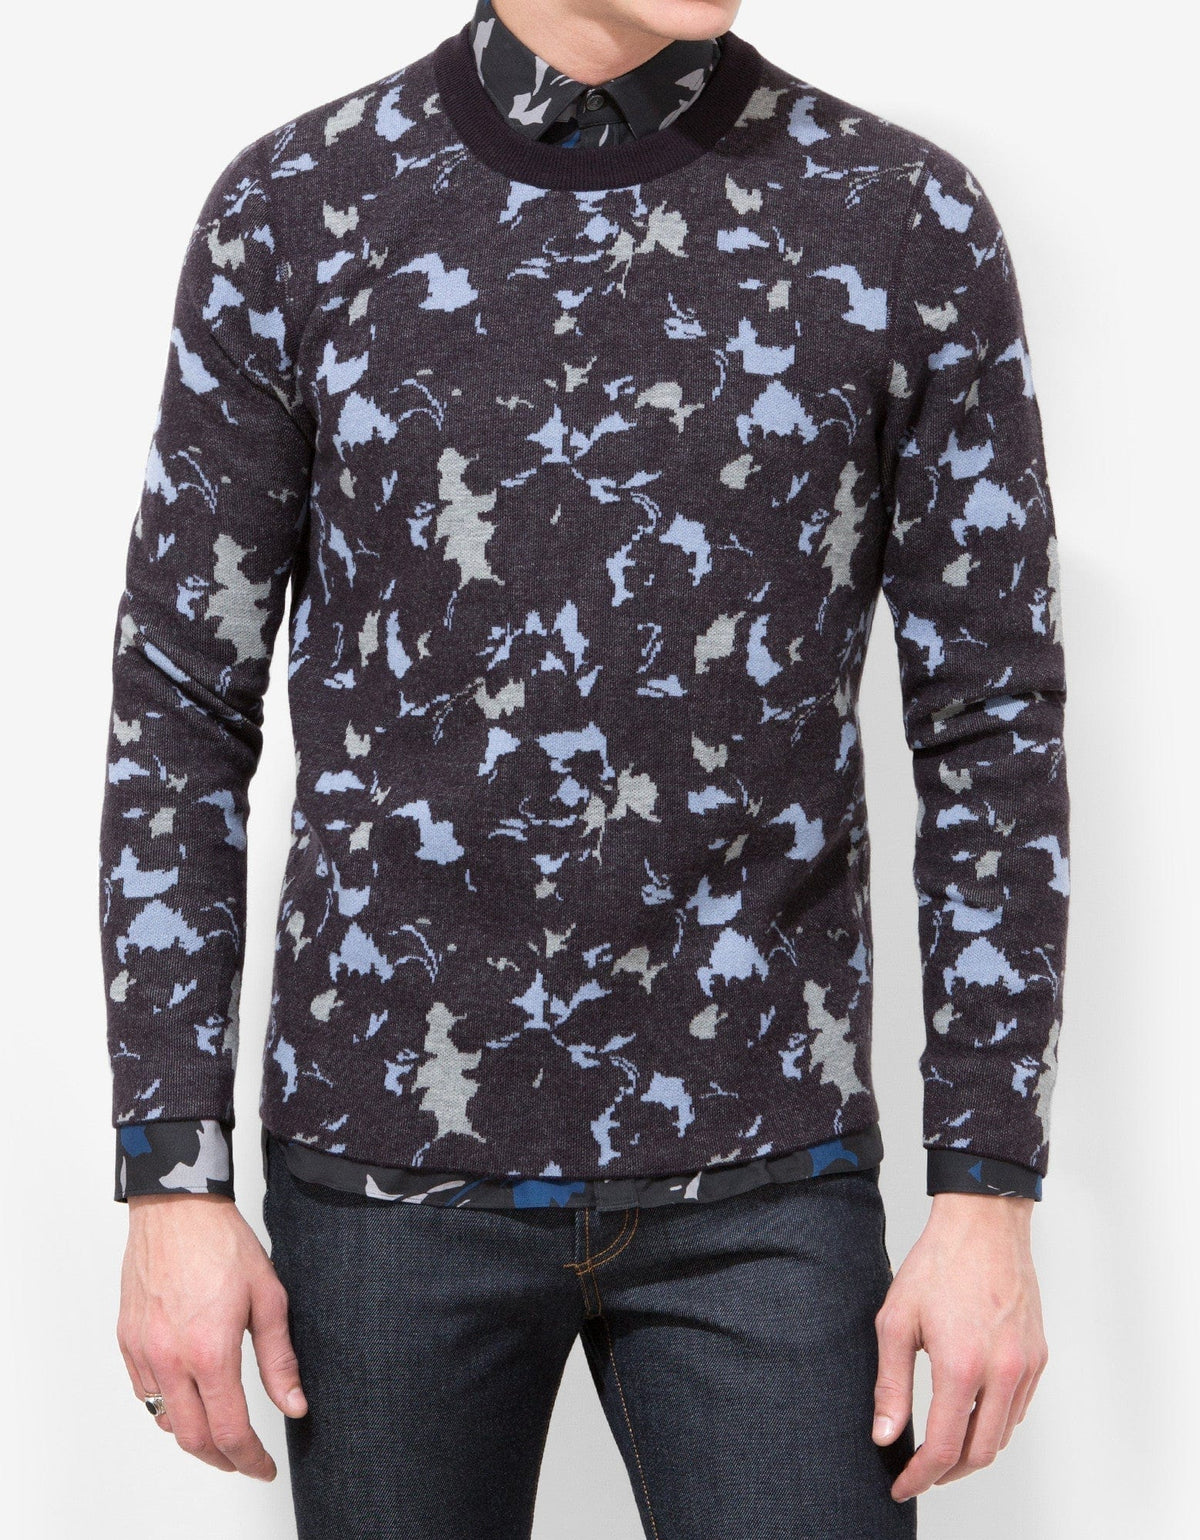 Lanvin Abstract Floral Wool Sweater